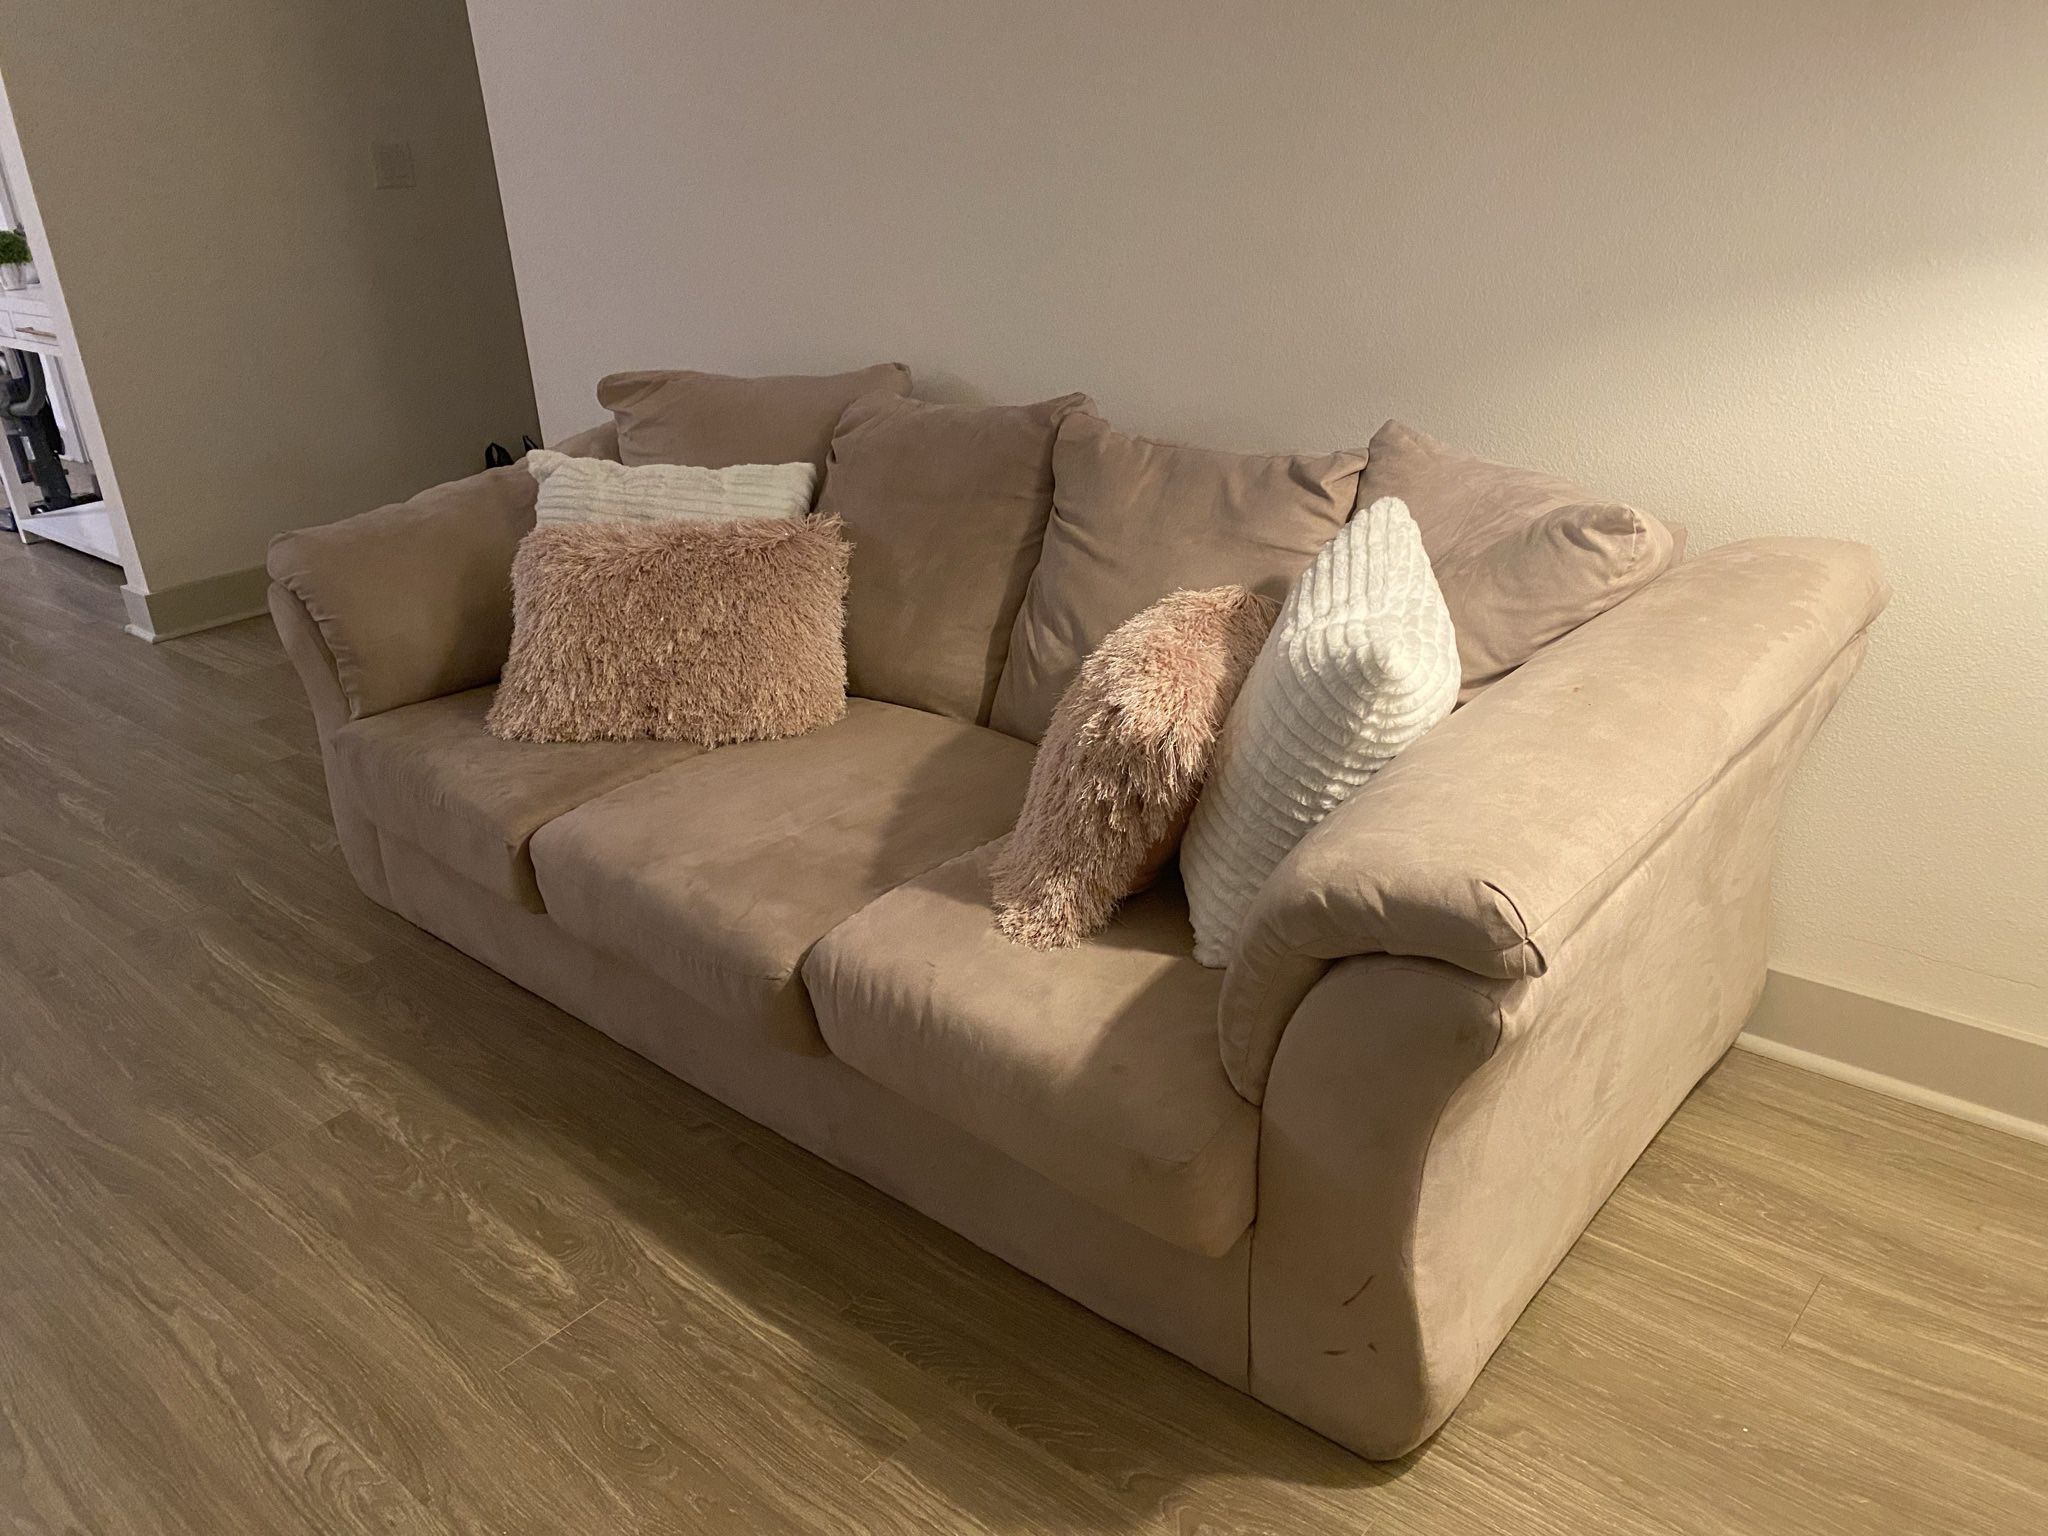 Light Pink Couch